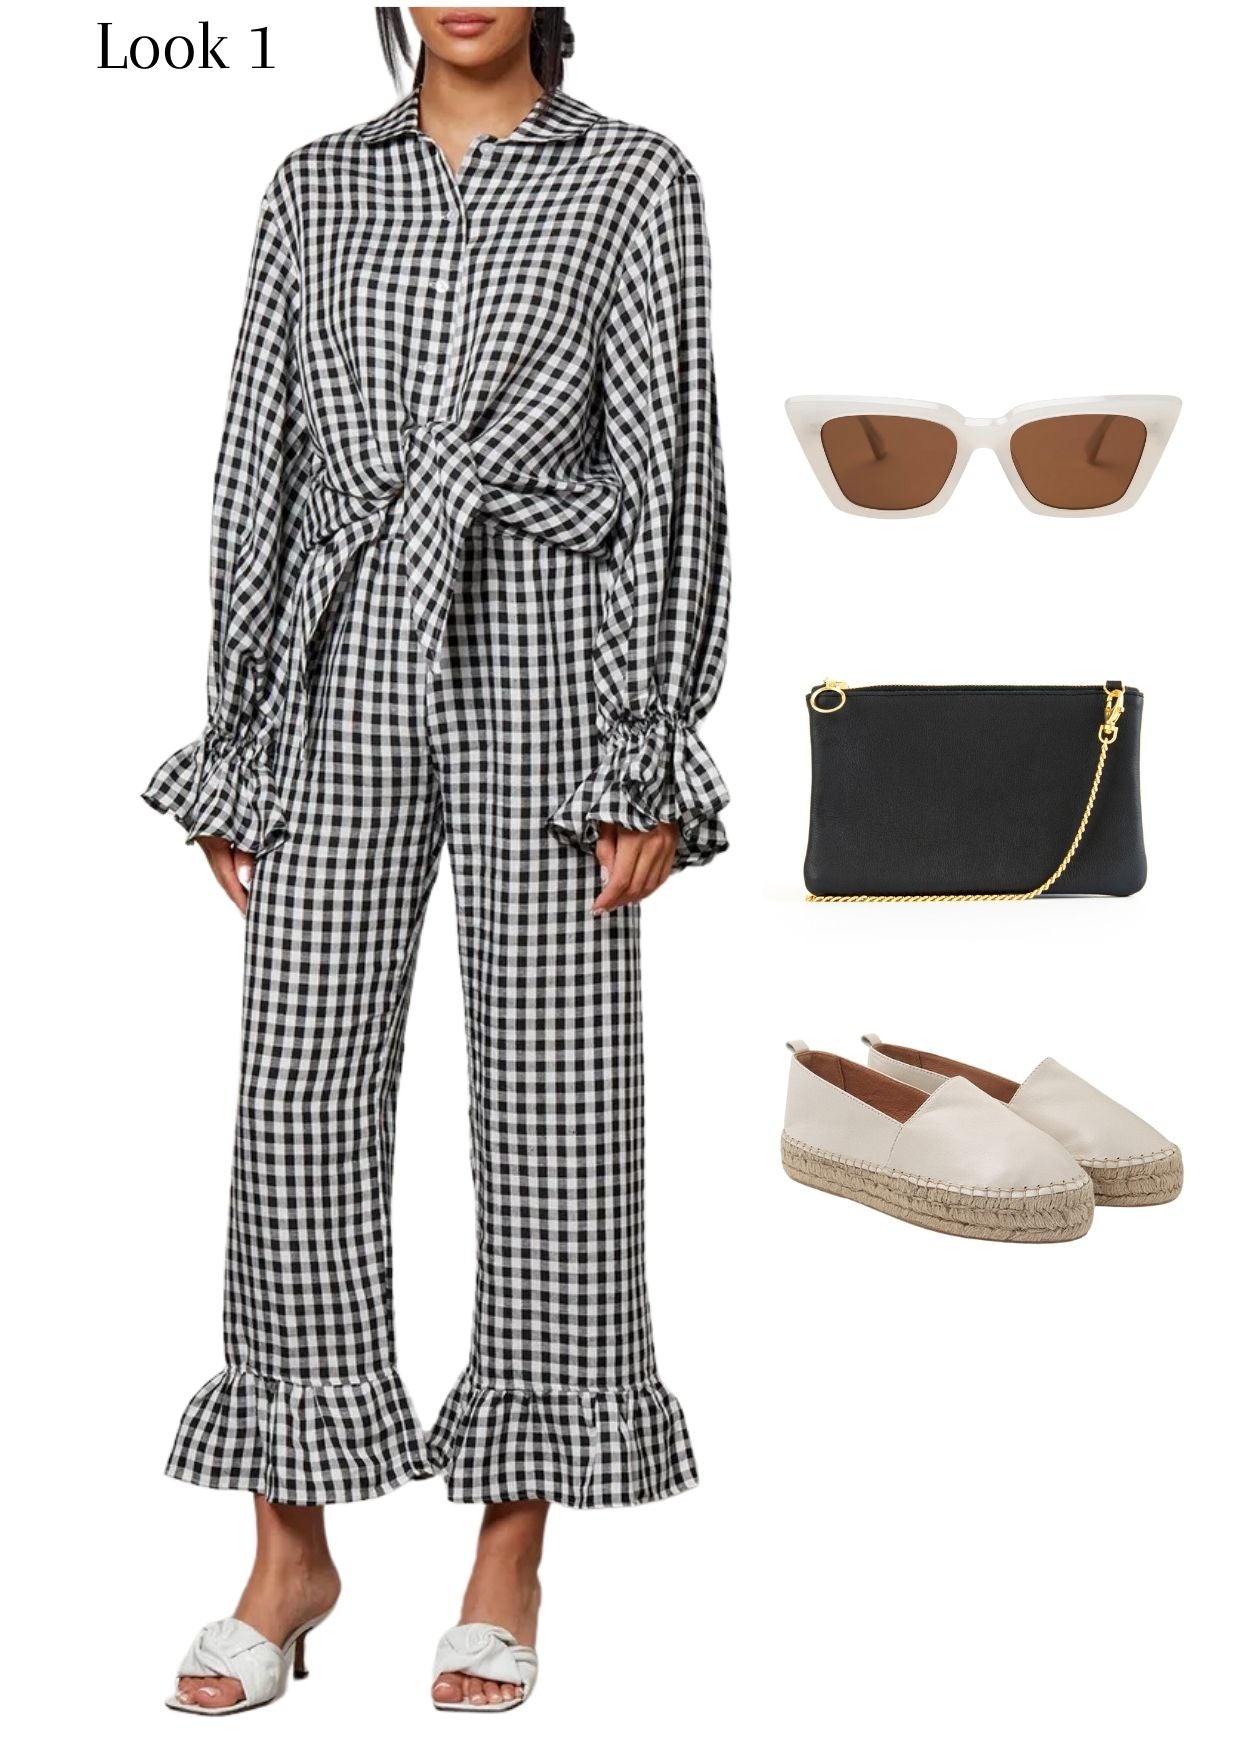 Look 1: Gingham two piece set and accessories